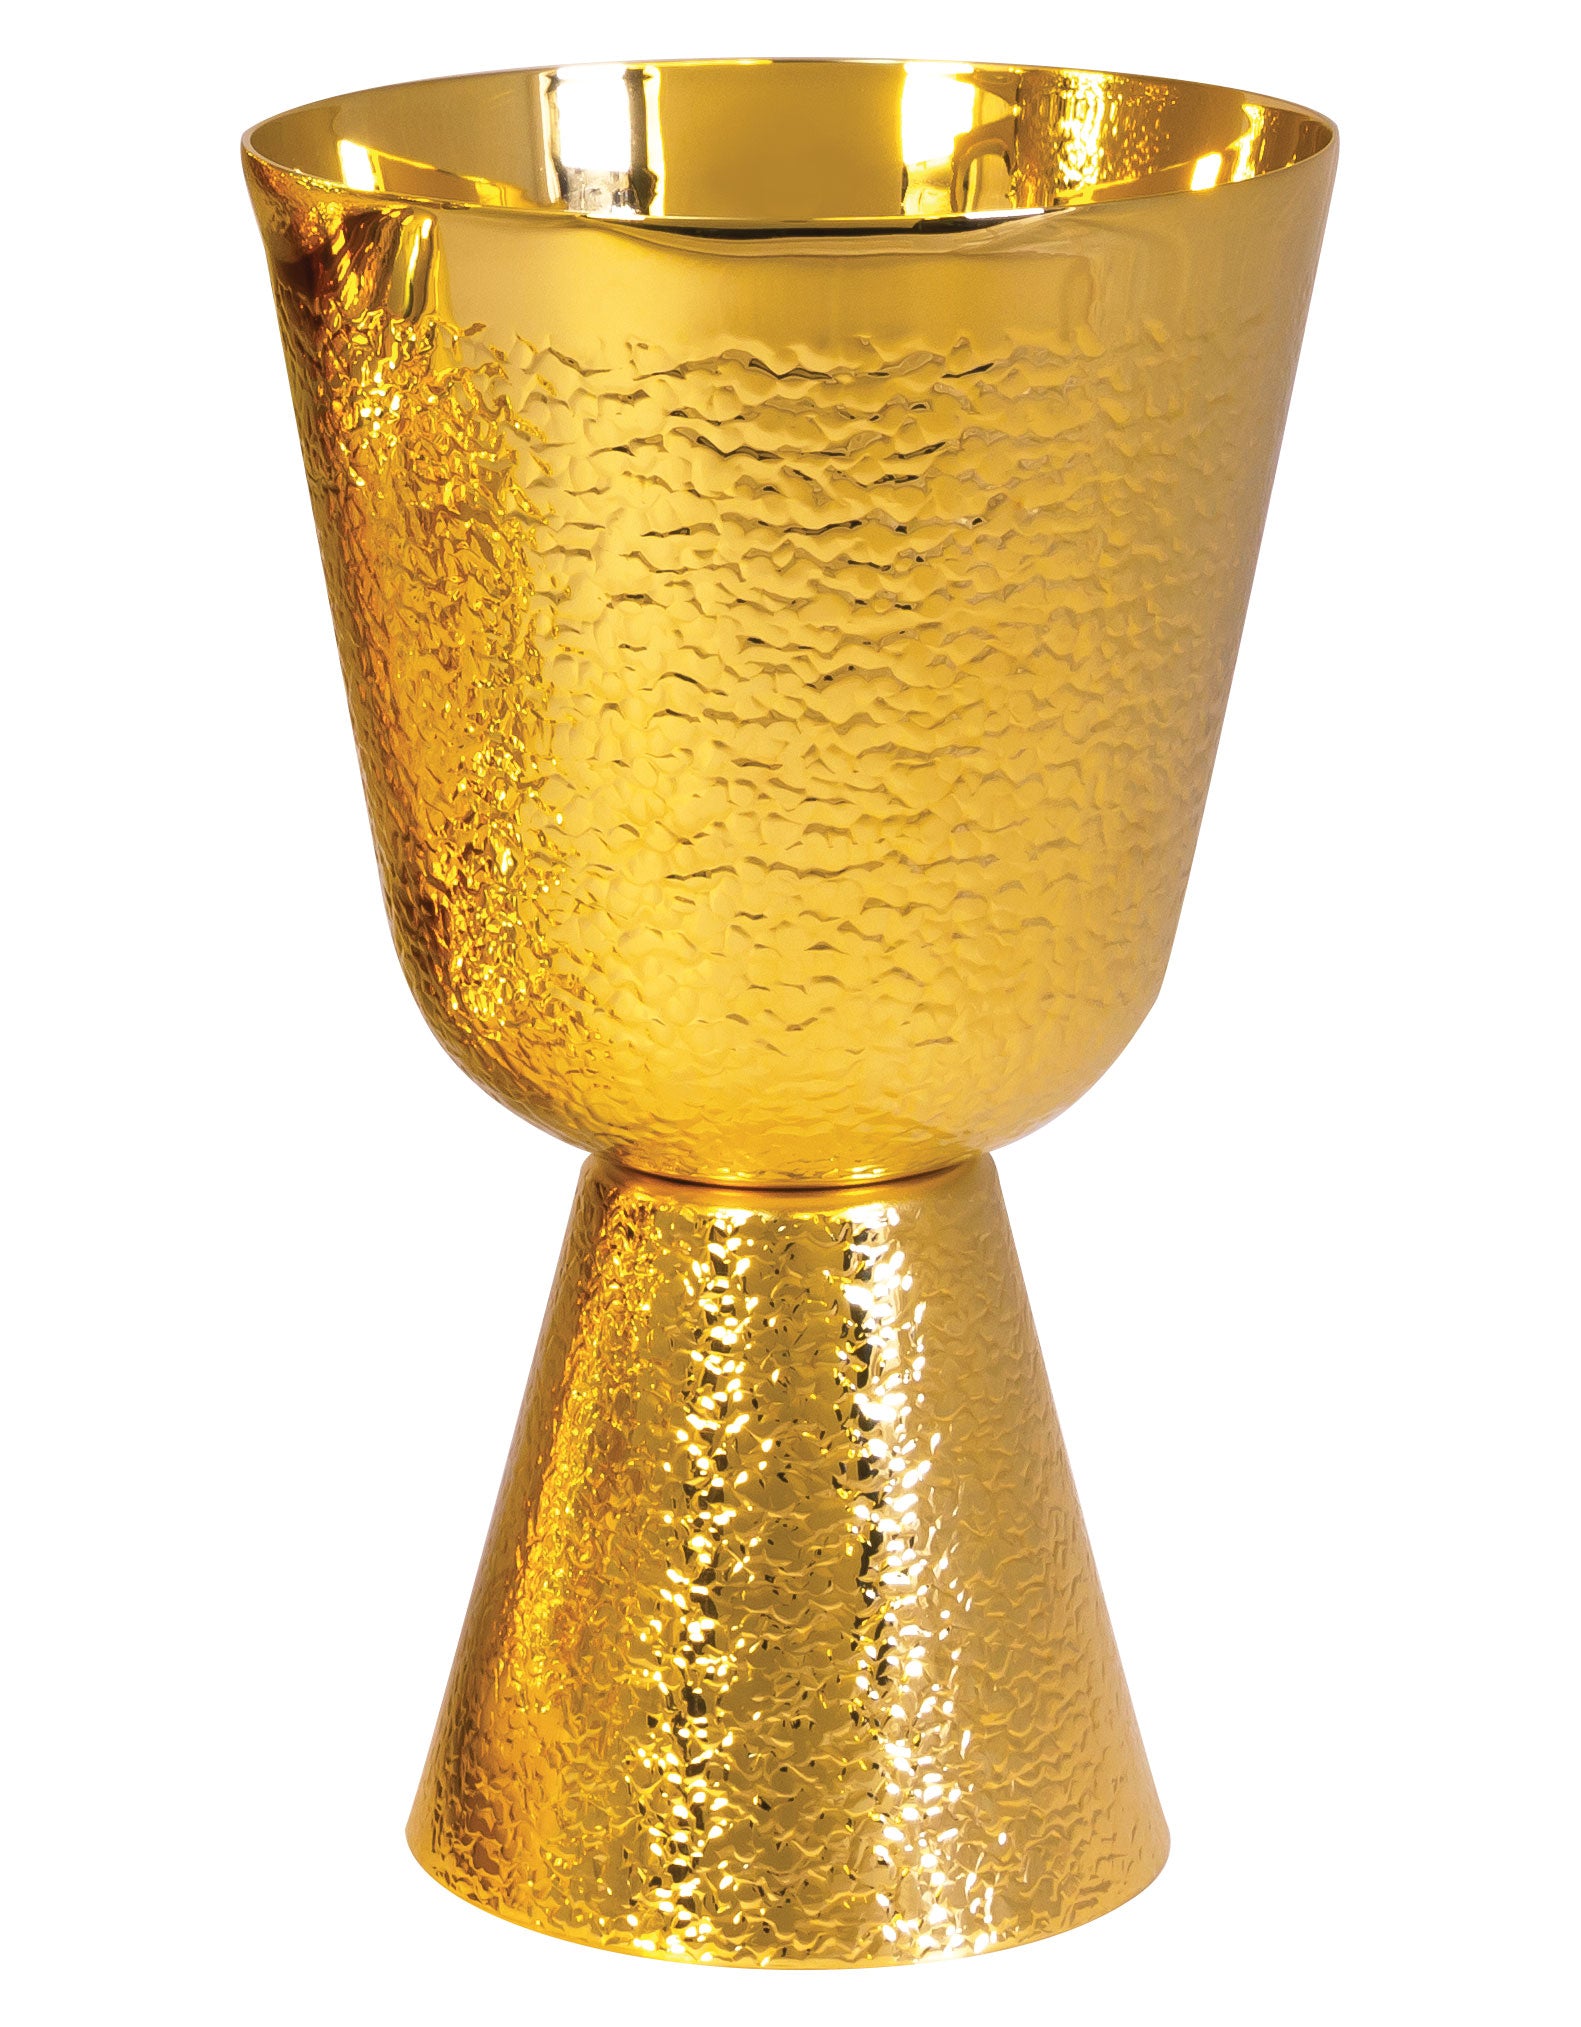 goldplated-communion-cup-720g.jpg